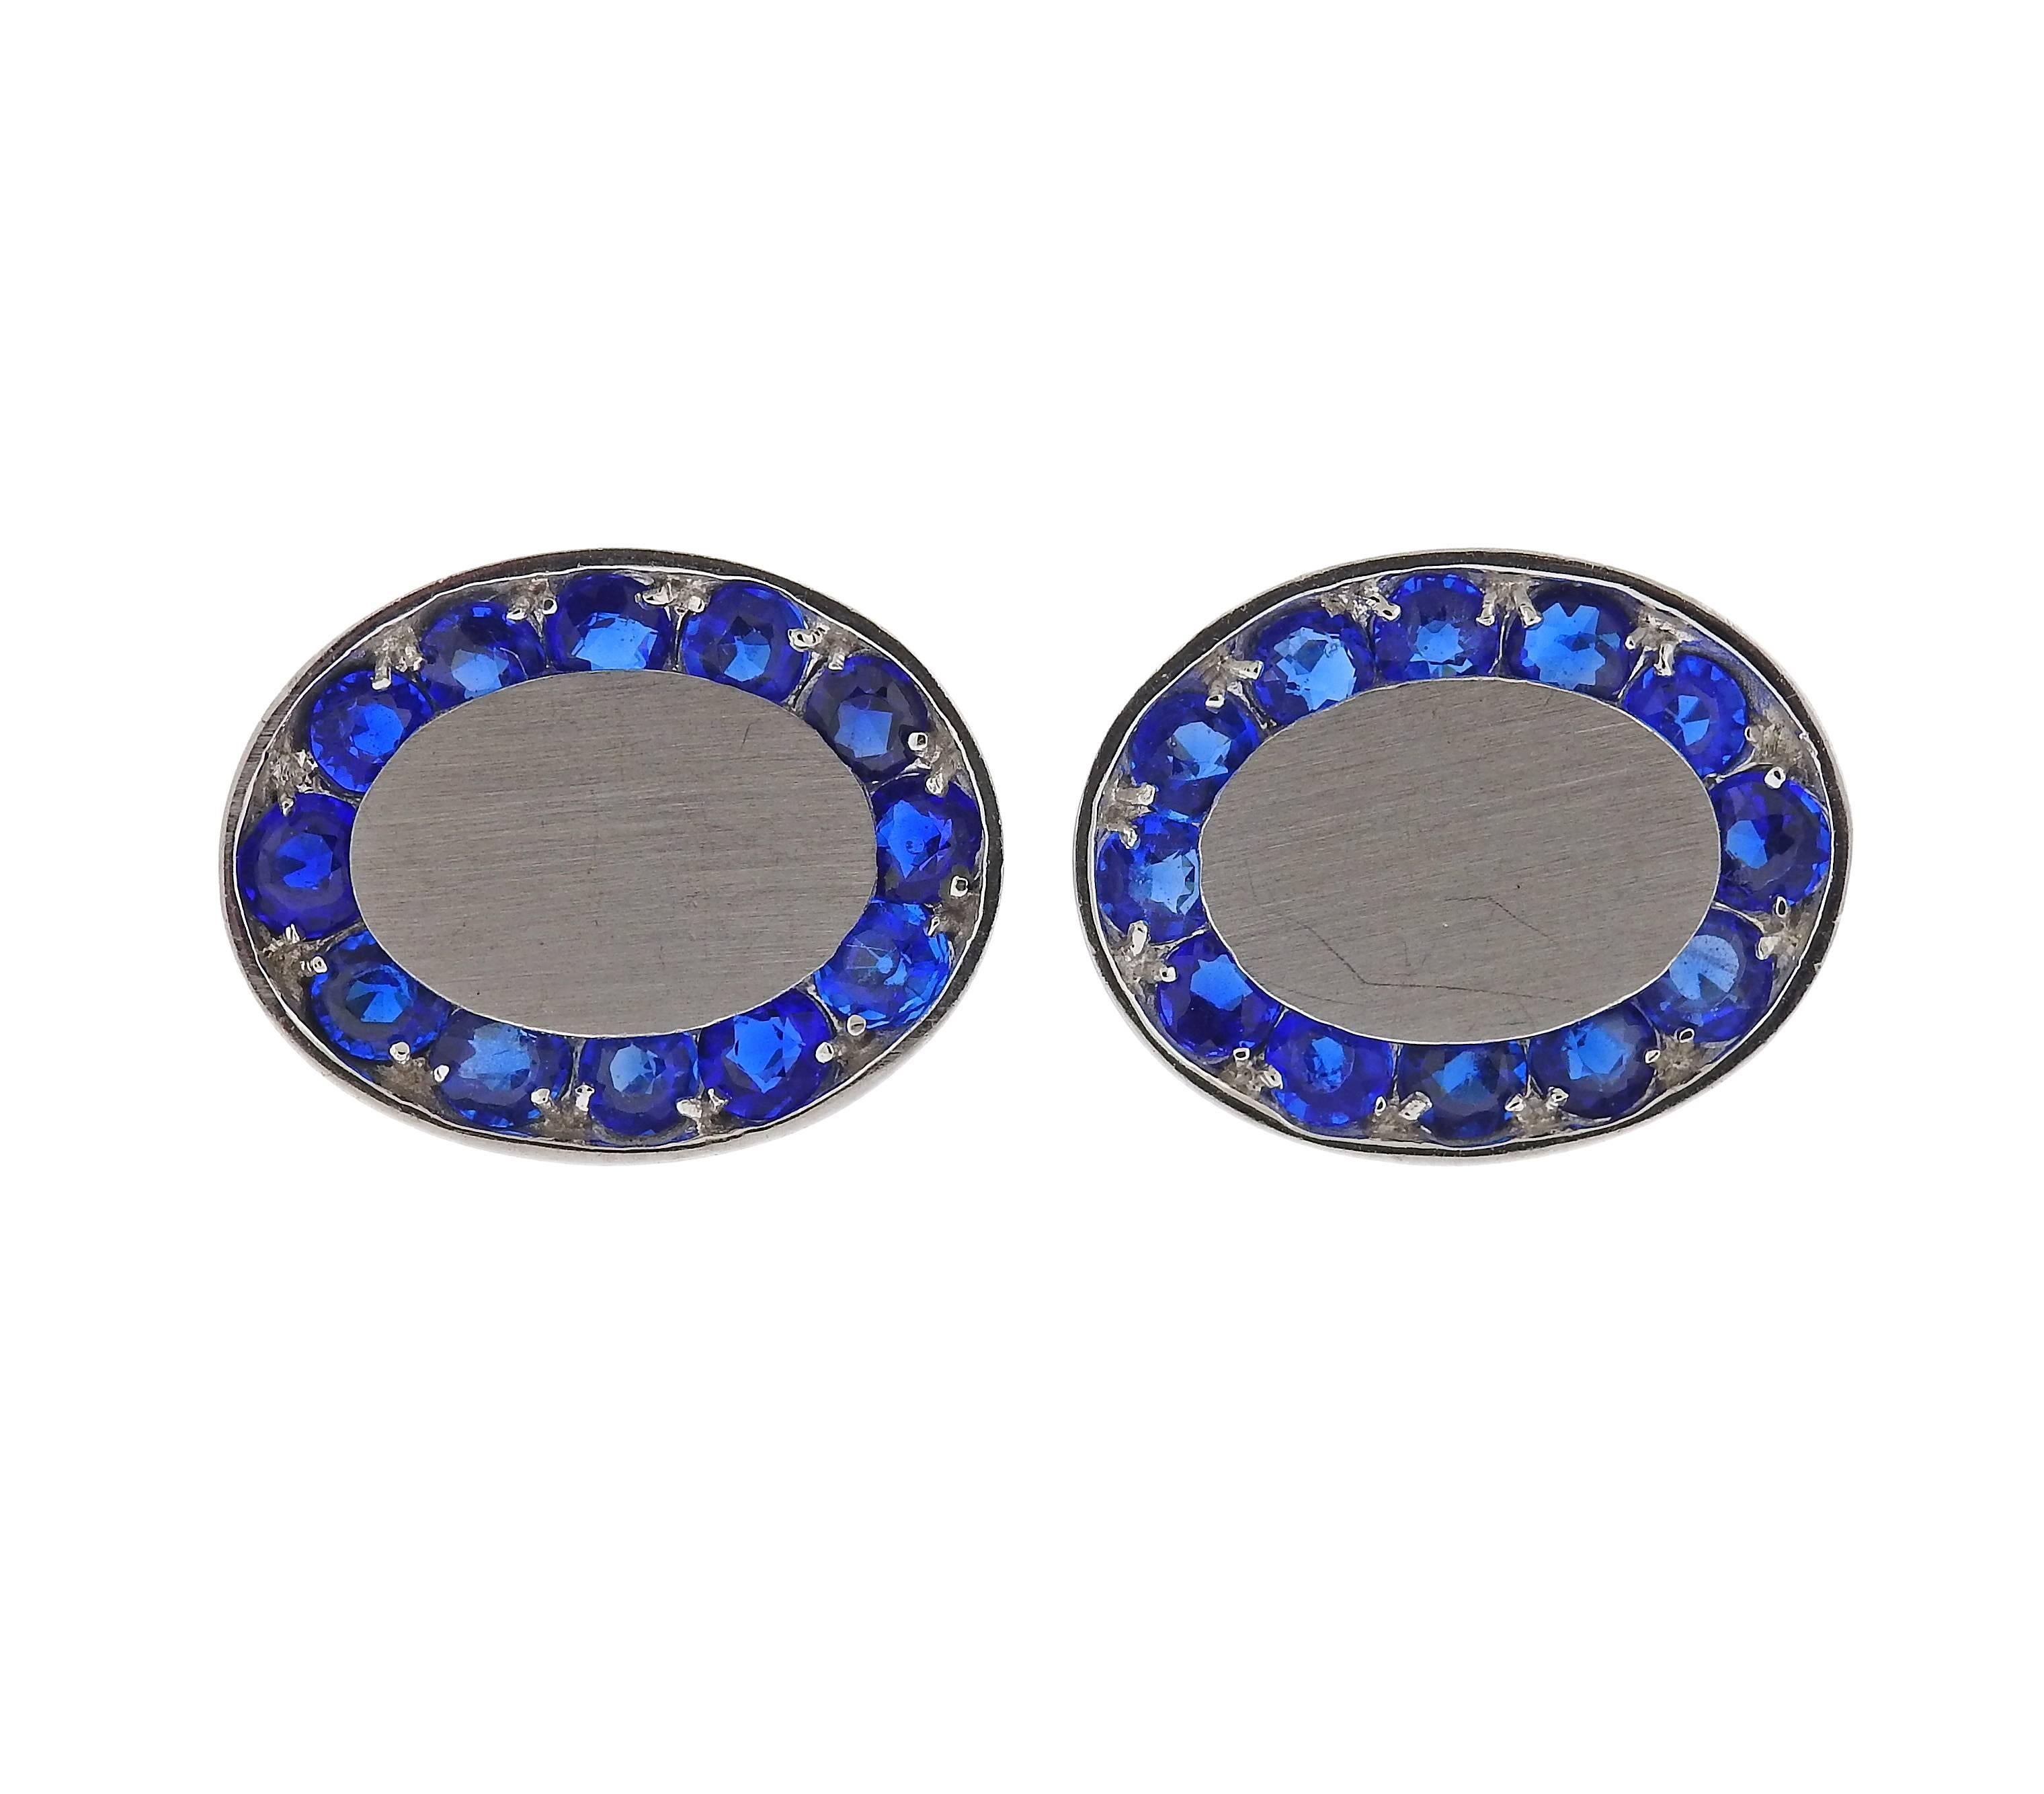 A pair of oval 14k gold cufflinks, crafted by Lucien Piccard, decorated with blue gemstones. Top measures 25mm x 20mm, weight - 19.2 grams. Lucien Piccard, 14k. 